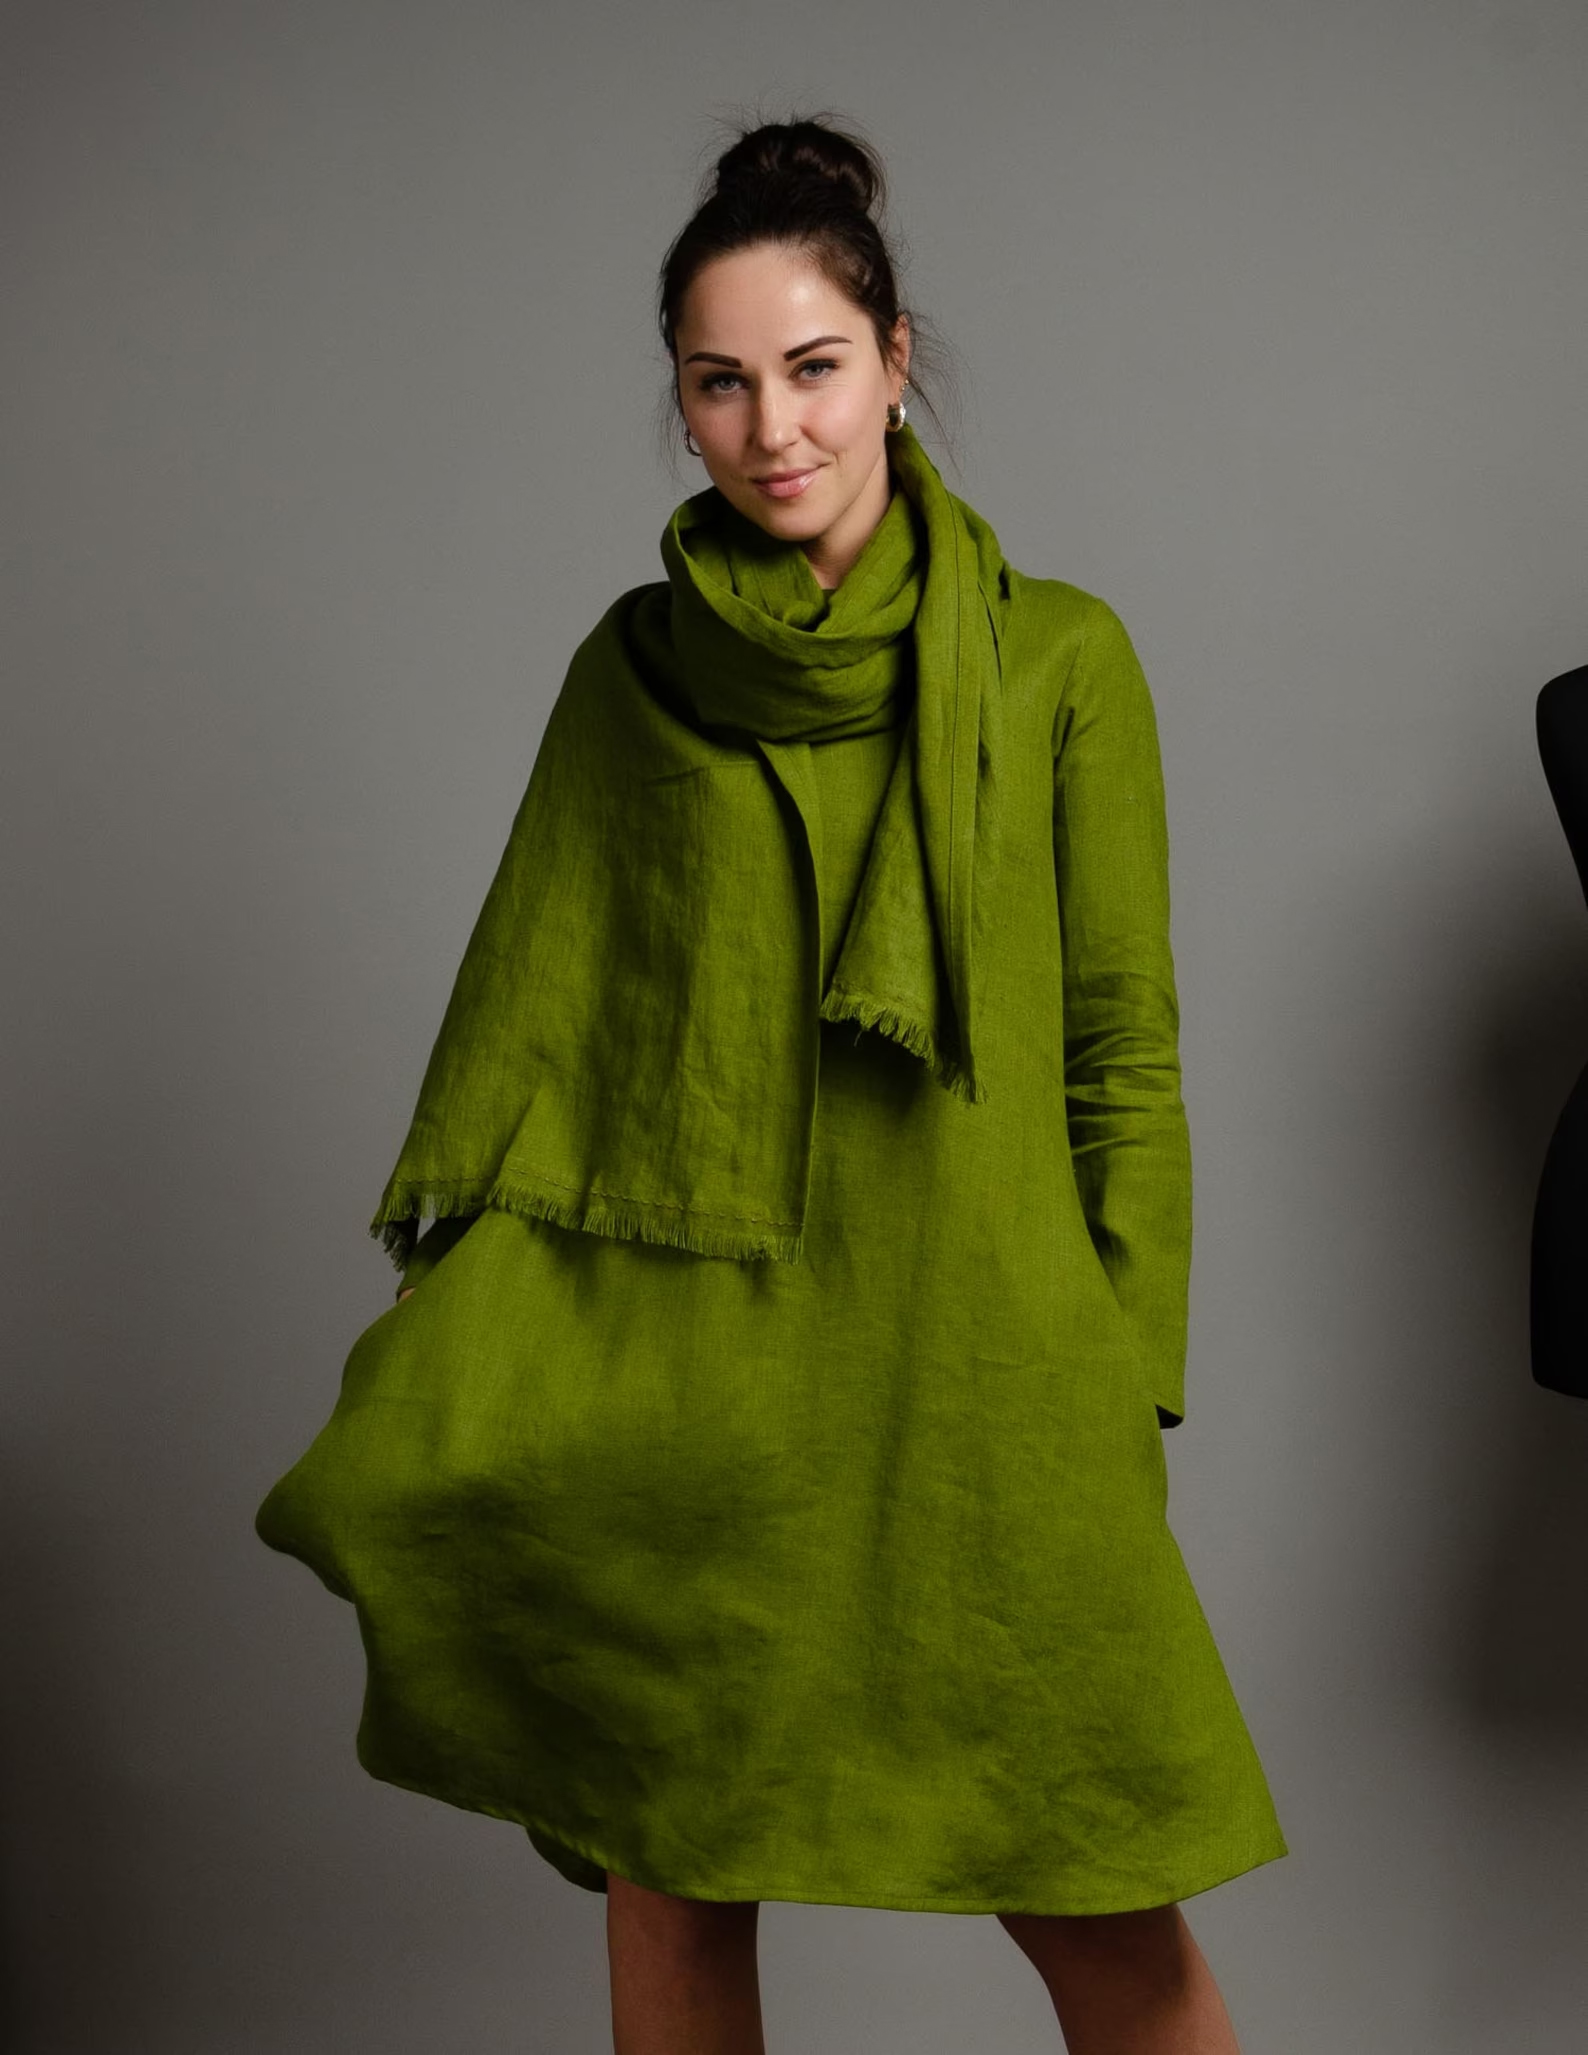 A model wearing an Etsy sustainable scarf.